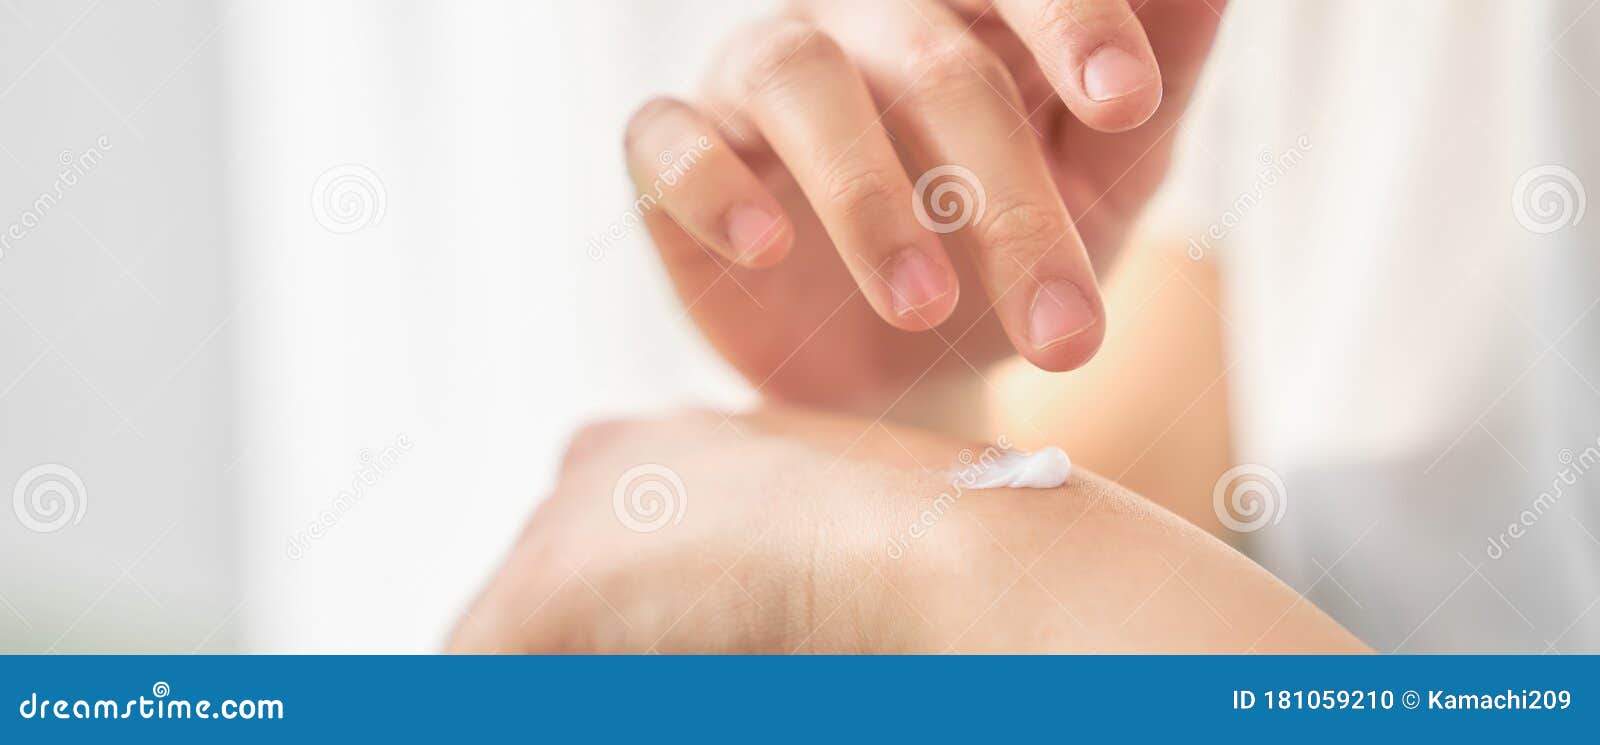 close up of woman hand holding and applying moisturiser, body lotion,  on white background.